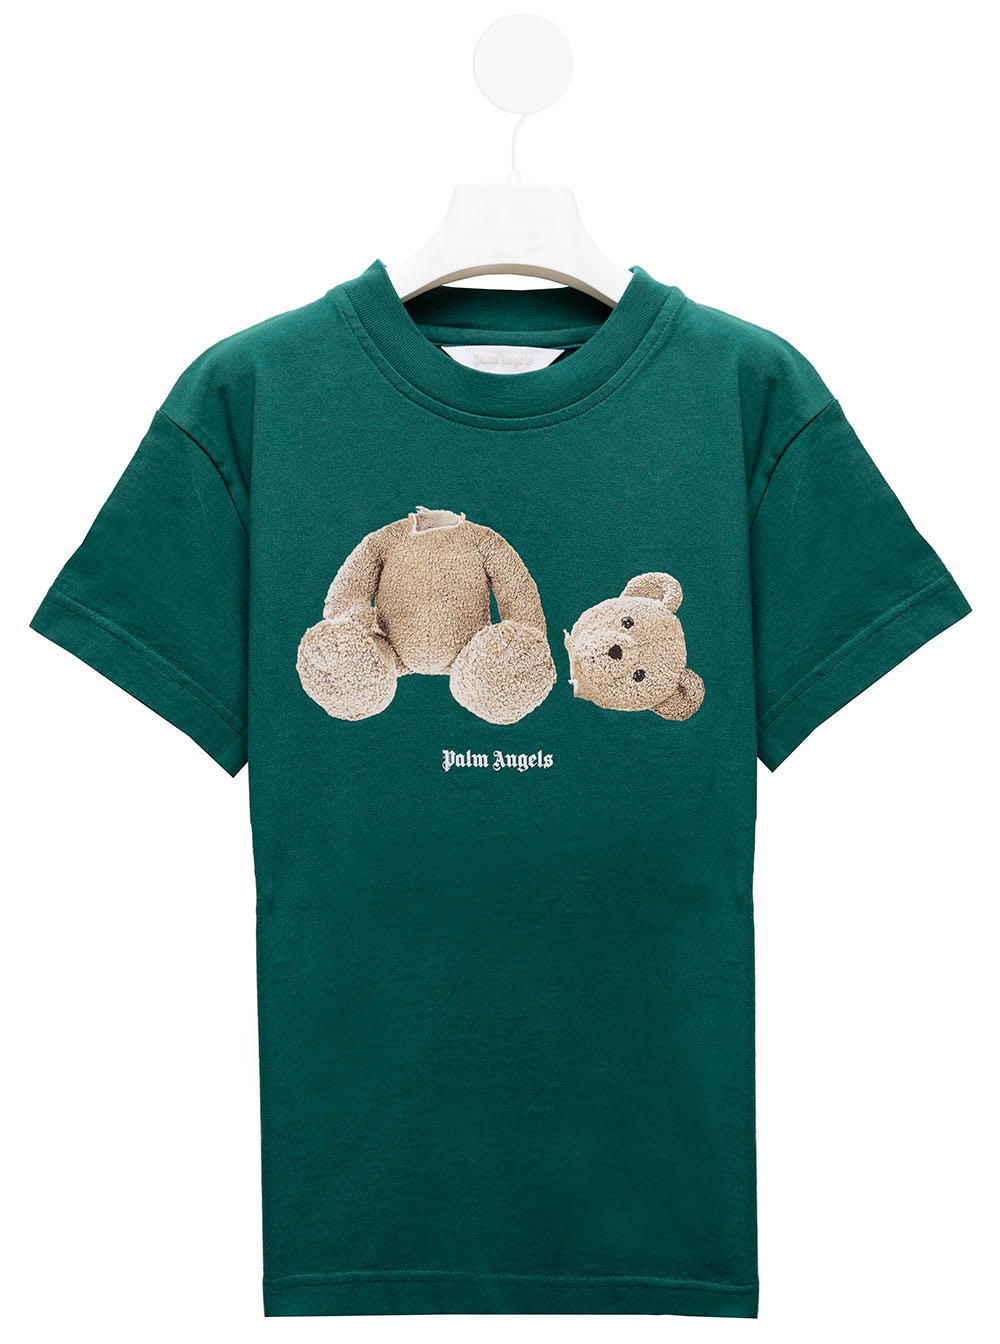 Green Cotton T-shirt With Bear Loose Front Print Palm Angels Kids Boy